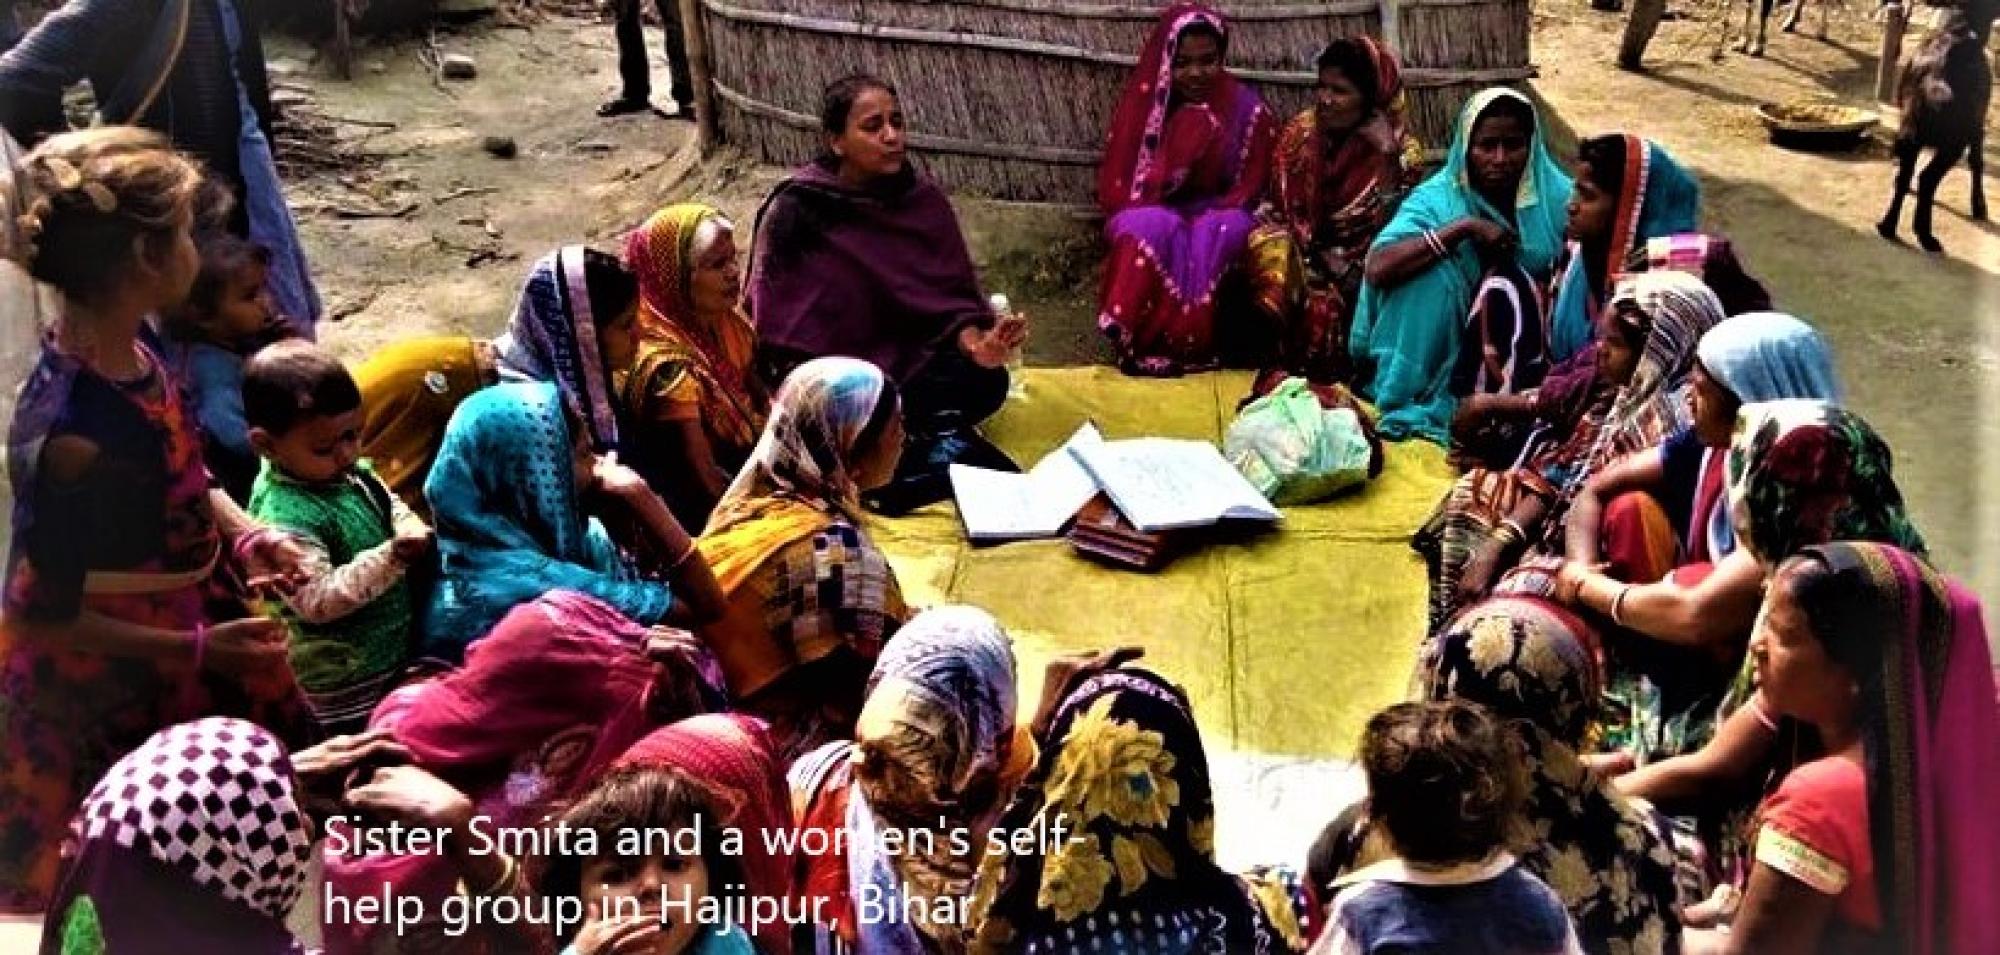 Sister Smita with the self help group of women in Hajipur